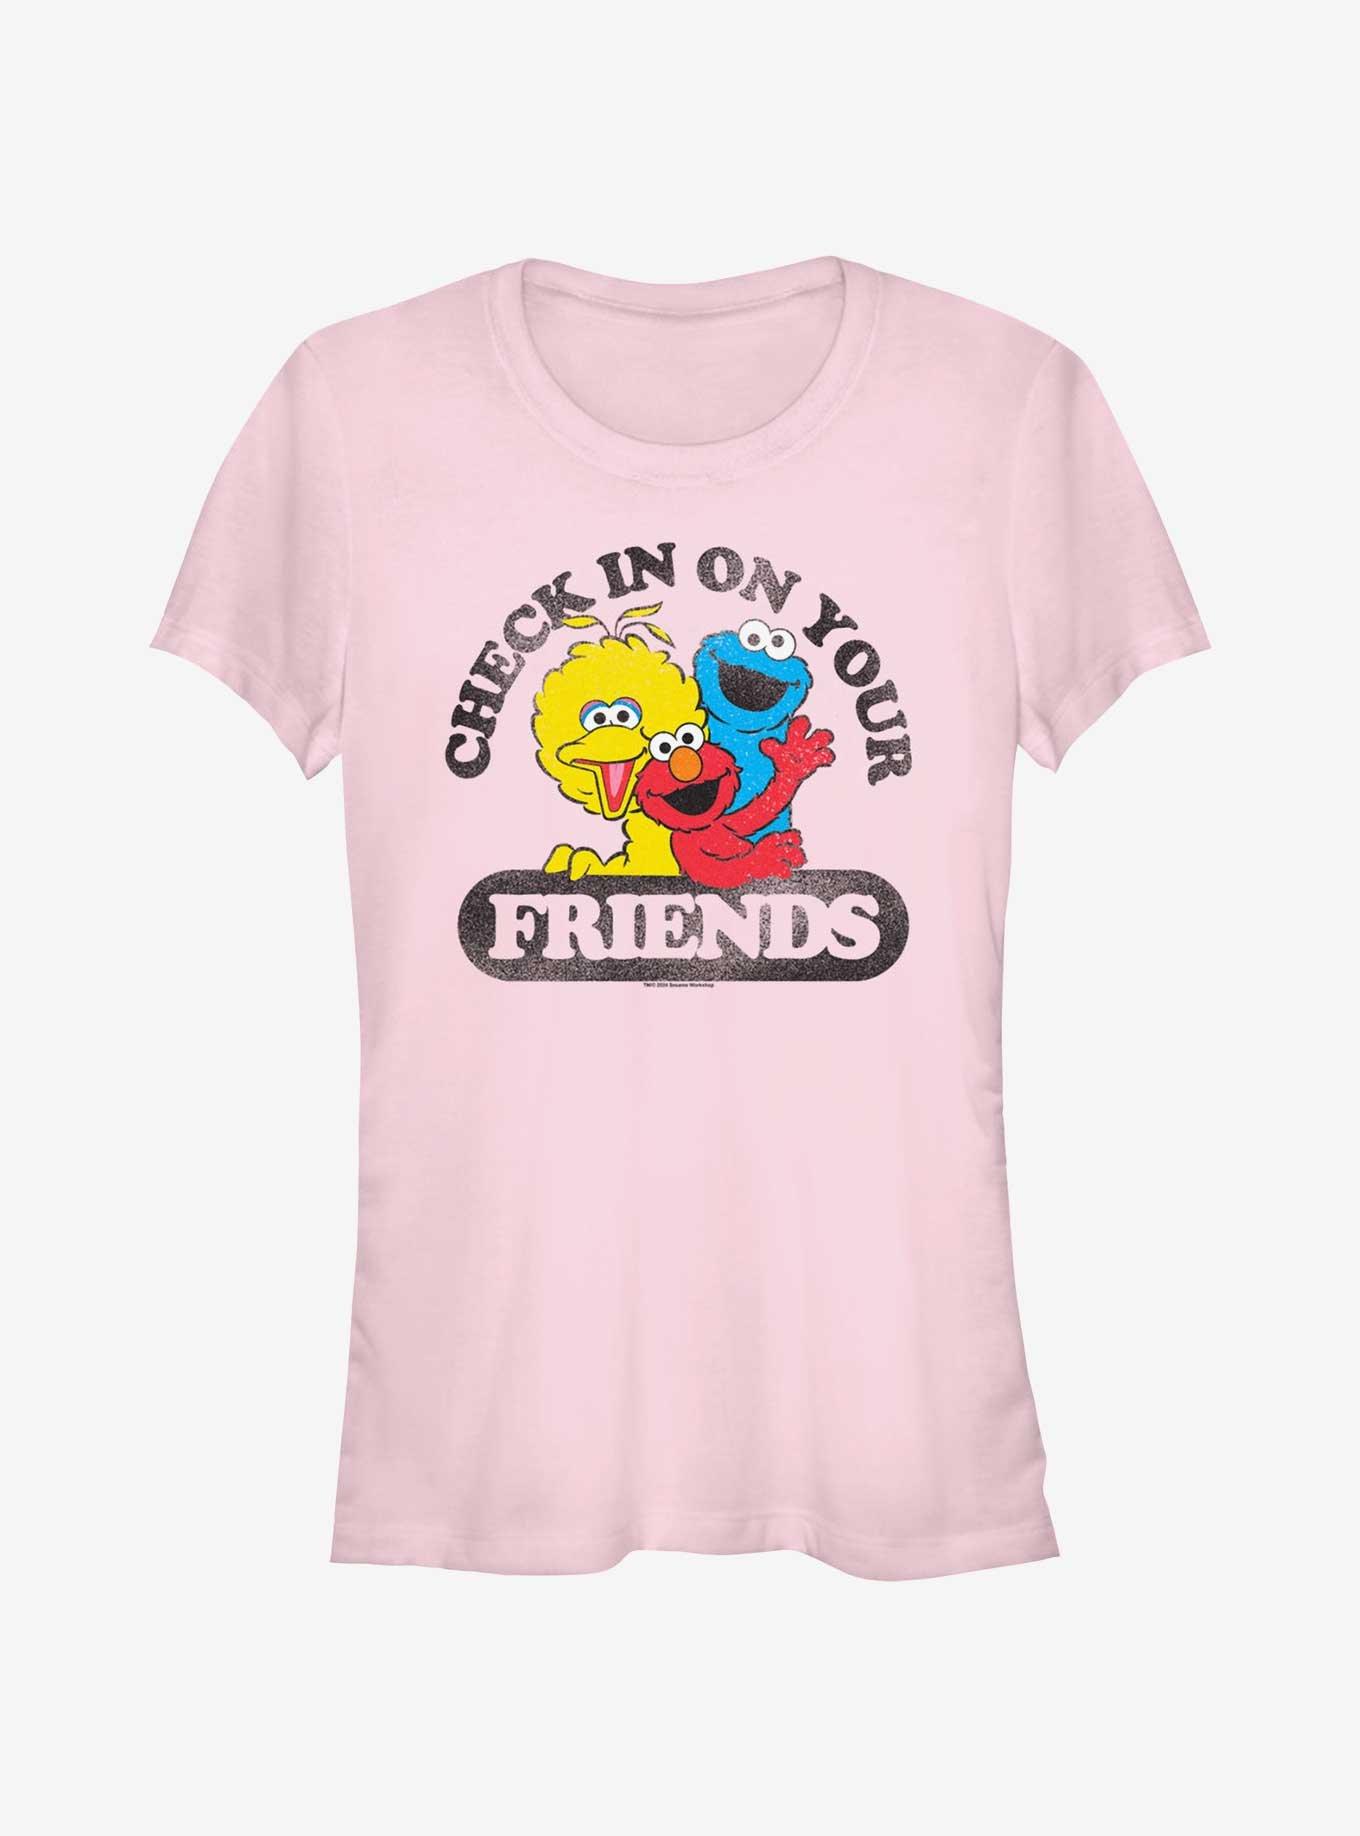 Sesame Street Check In On Your Friends Big Bird Cookie Monster and Elmo Girls T-Shirt, LIGHT PINK, hi-res